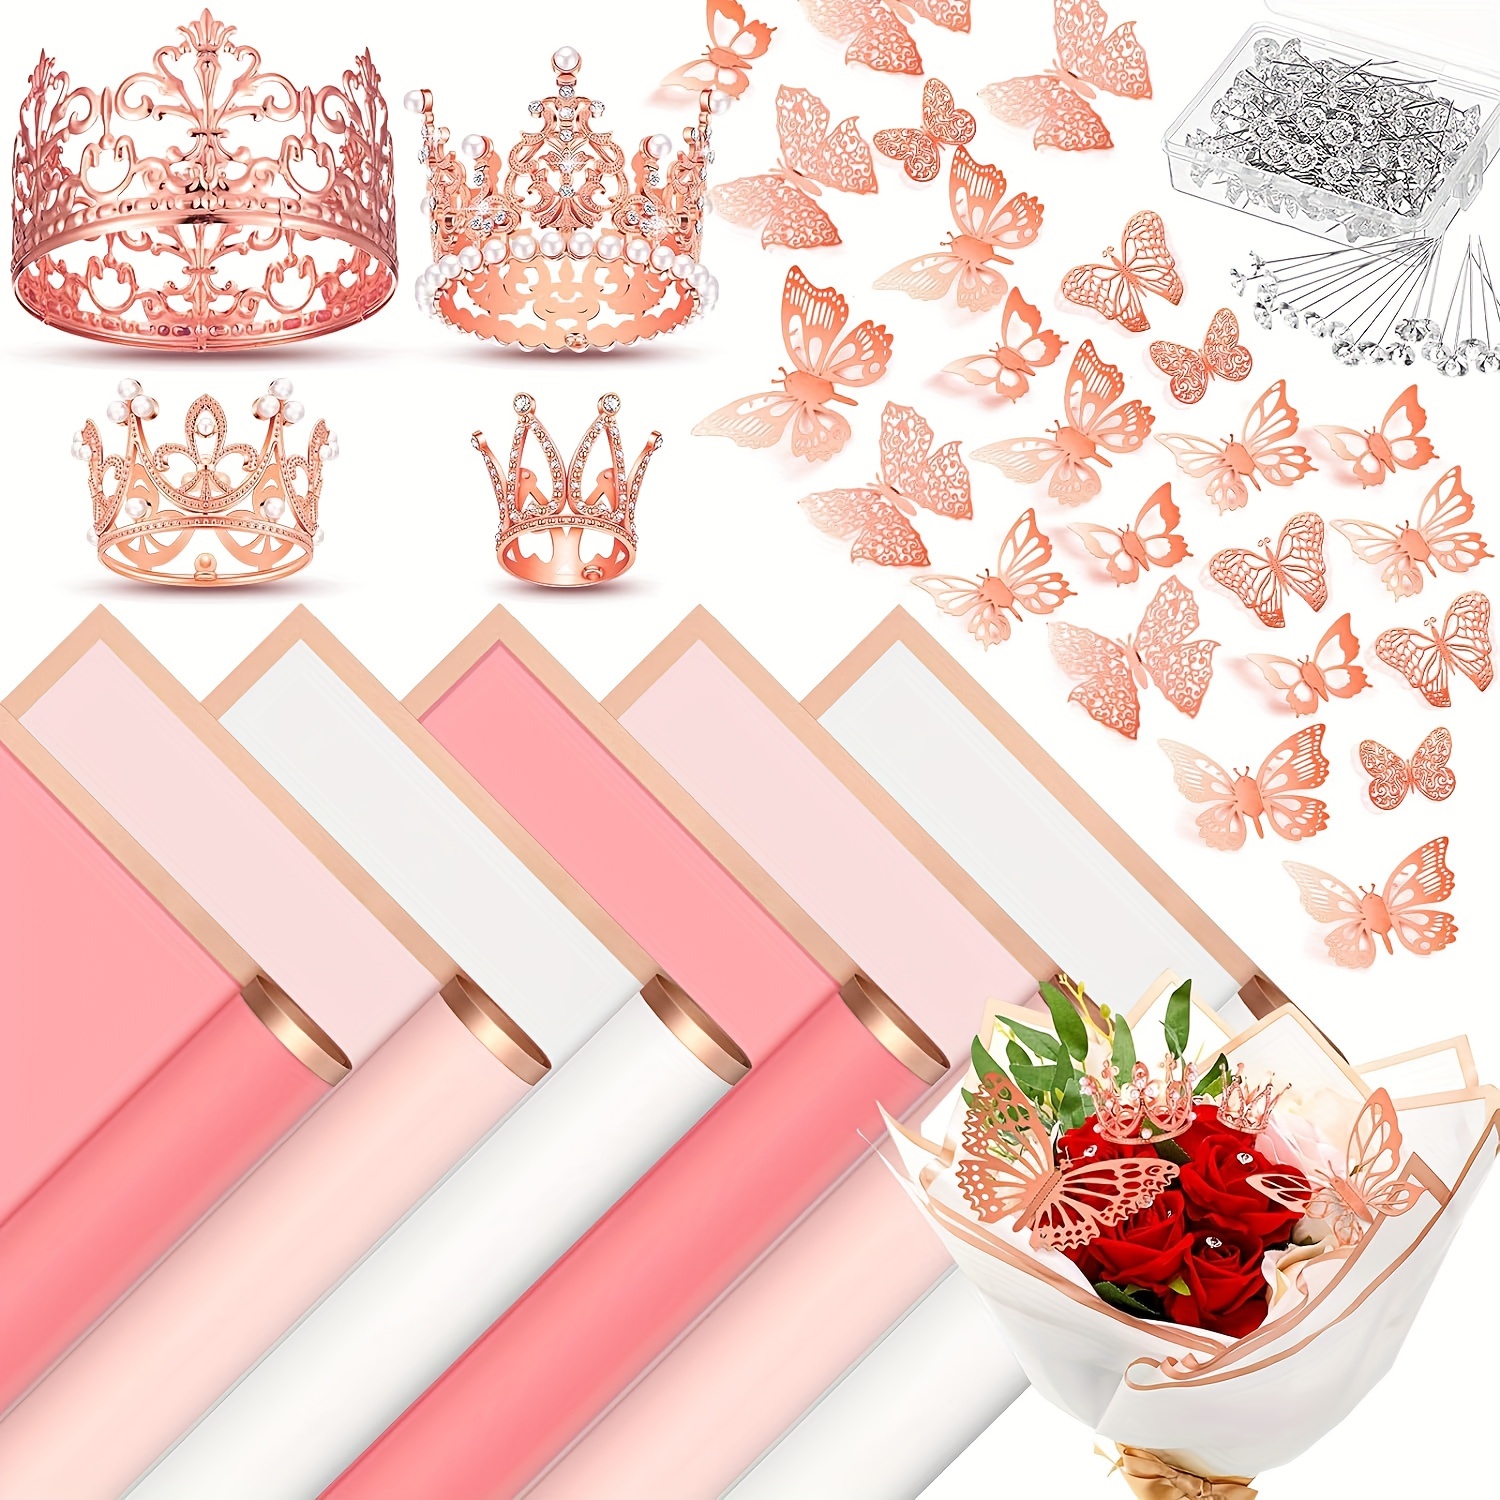 

148pcs Flower Bouquet Accessories Include 20 Sheets Flower Wrapping Paper 4 Mini Crowns 24 3d Butterfly Wall Decor And 100 Bouquet Pins For Wedding Birthday Party Baby Shower Decor (rose Gold)